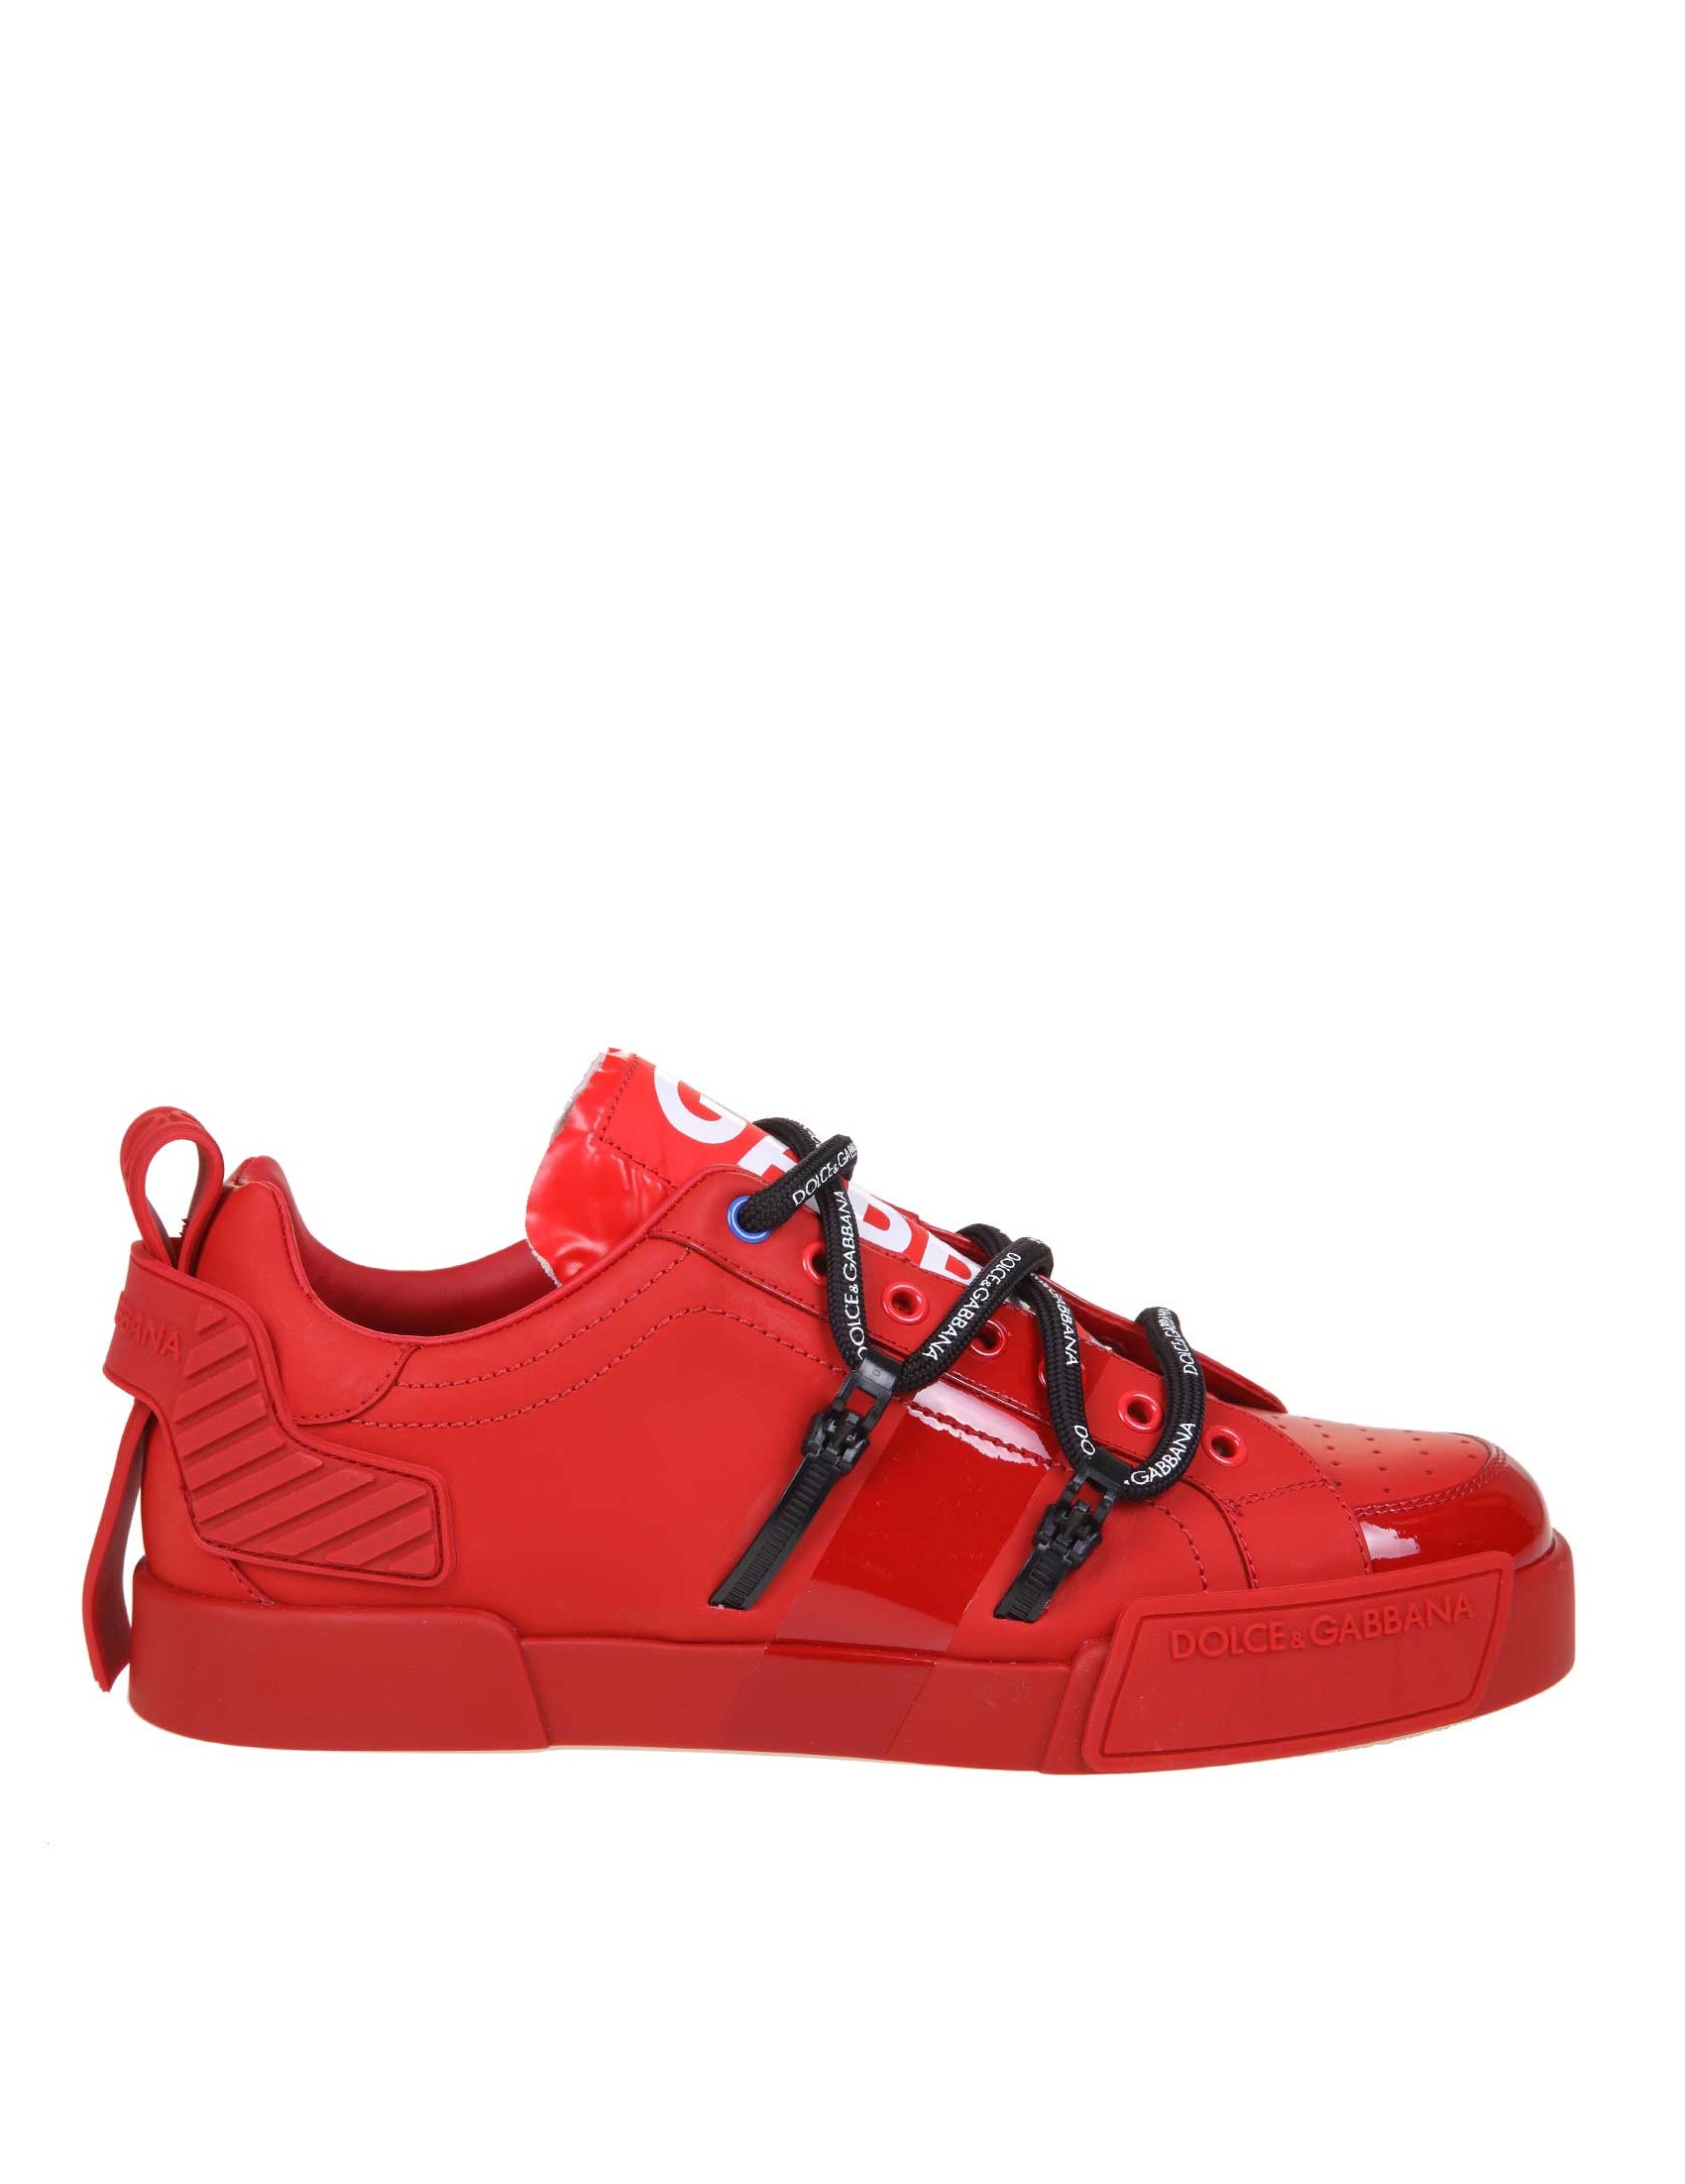 dolce and gabbana sneakers red